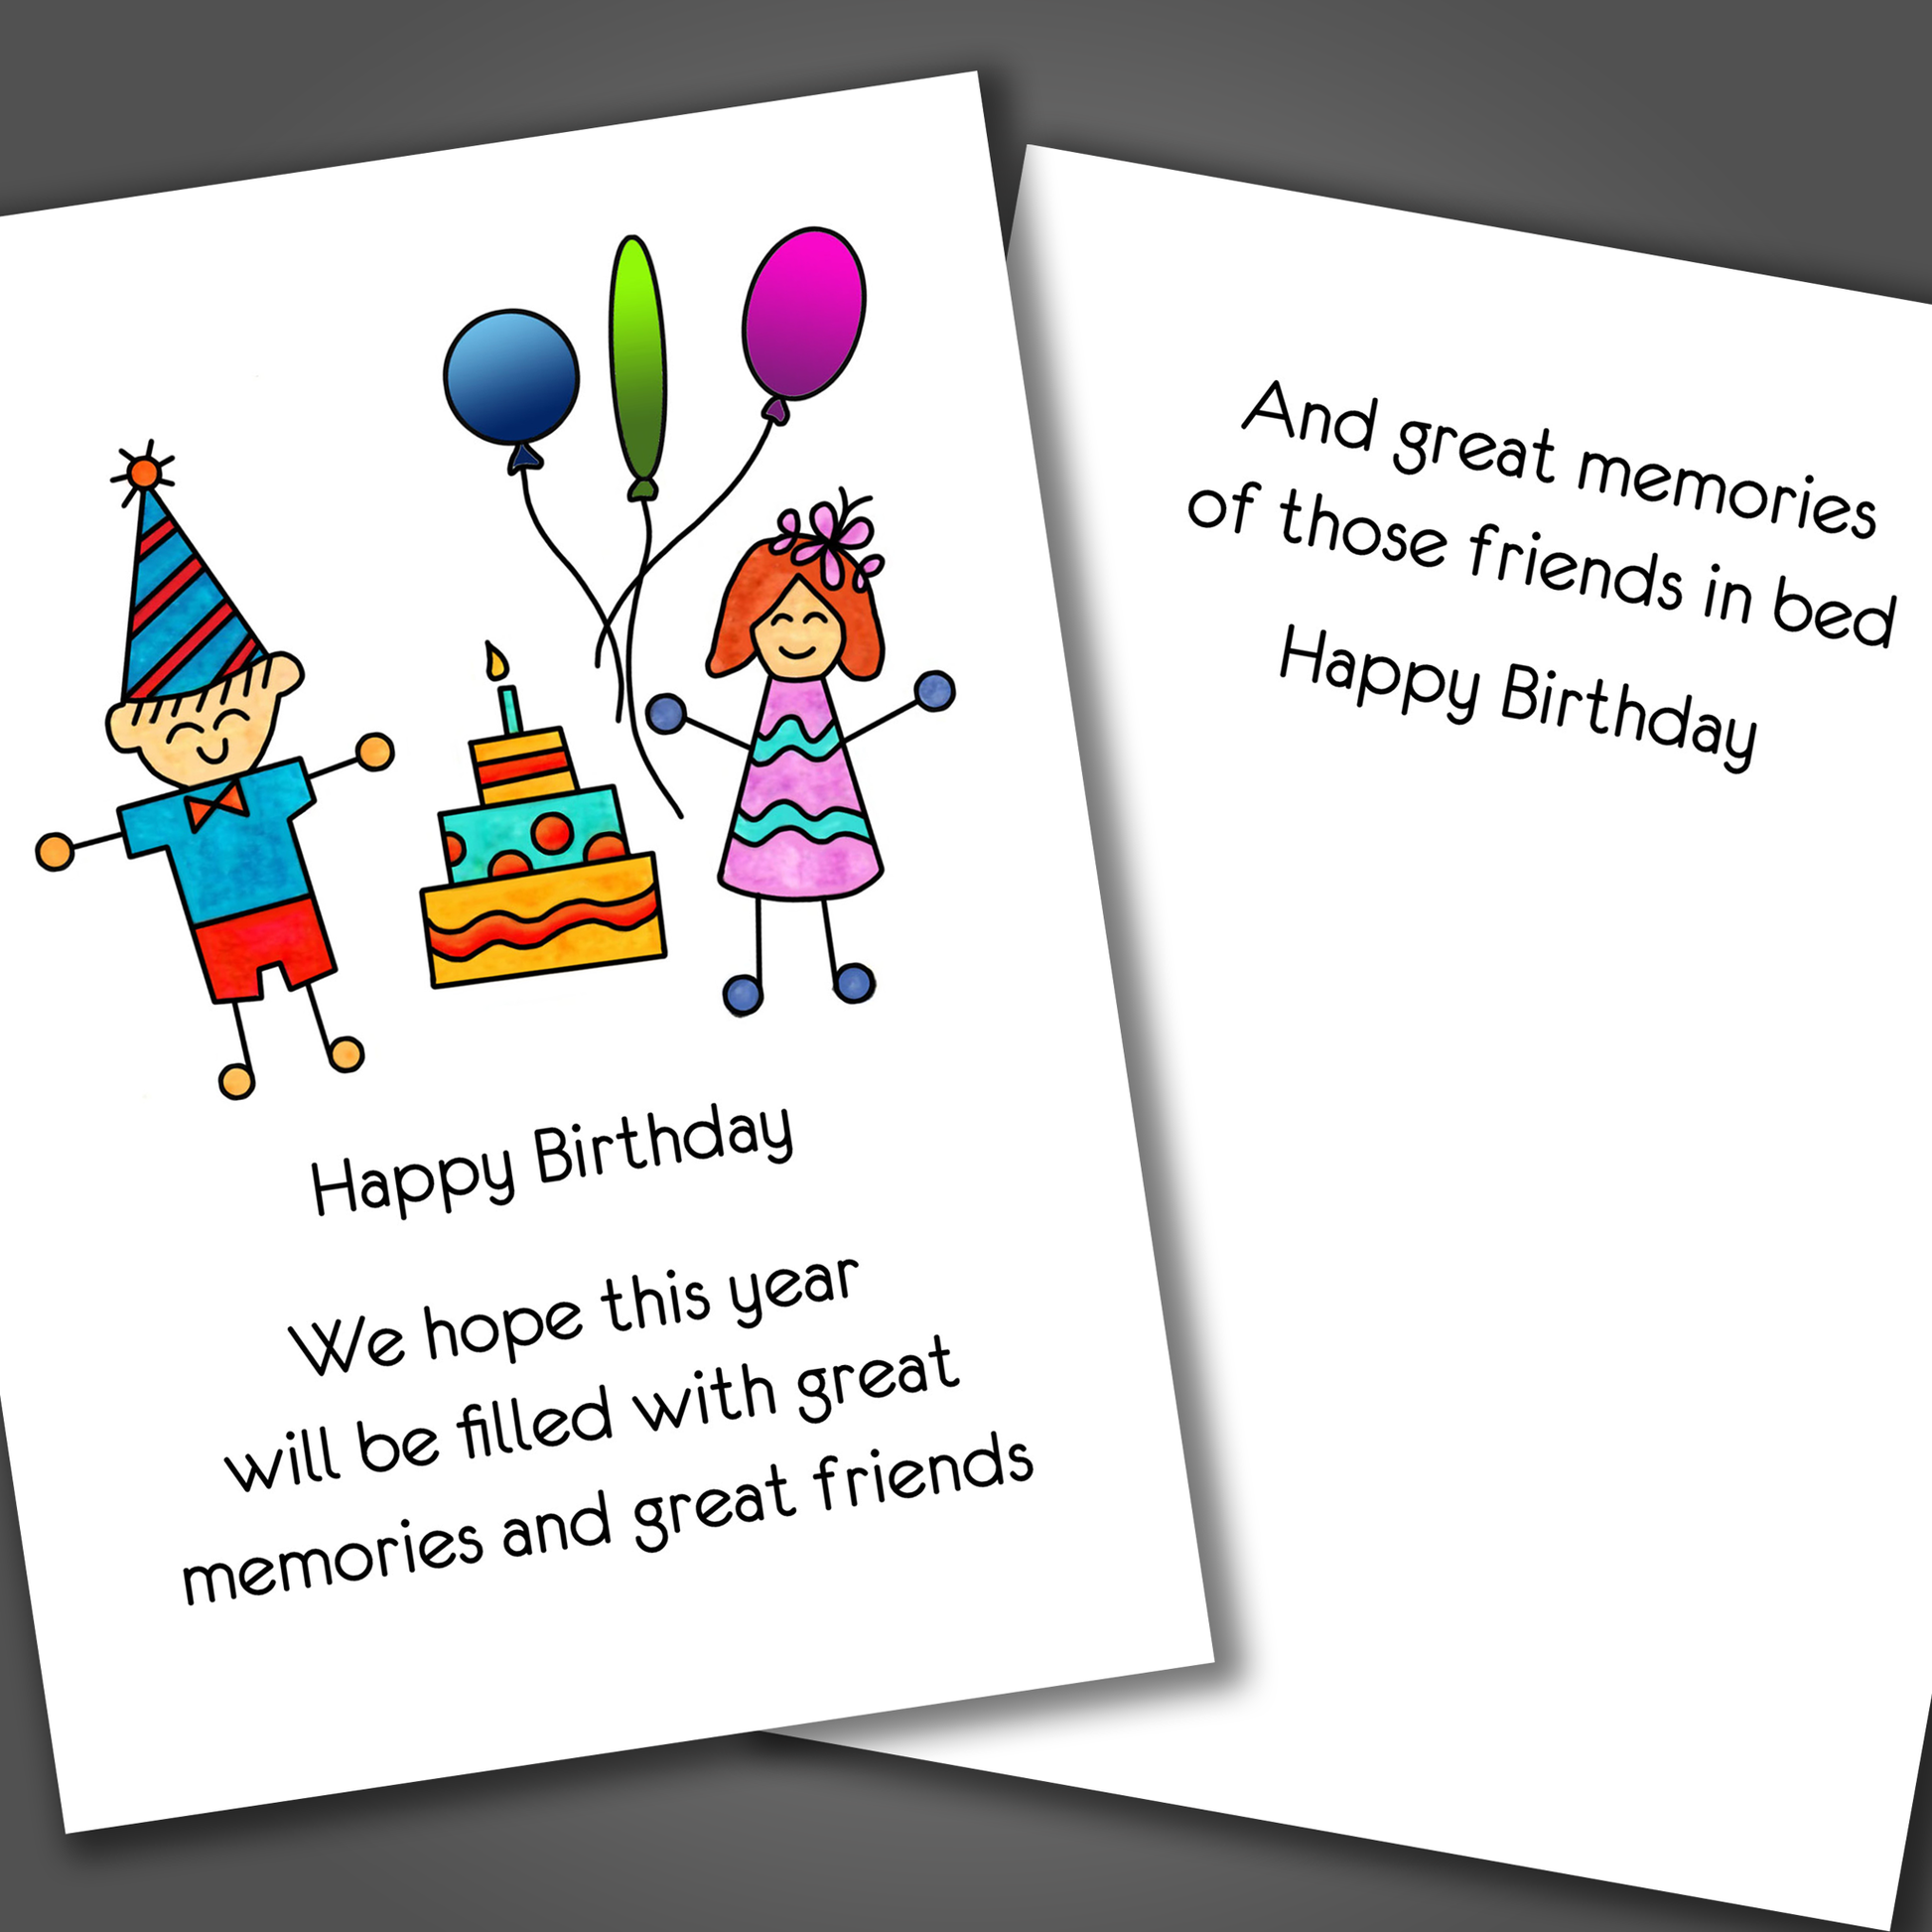 Funny happy birthday card with a boy and girl drawn  on the front of the card with a cake. Inside of the card is a funny joke that ends with happy birthday